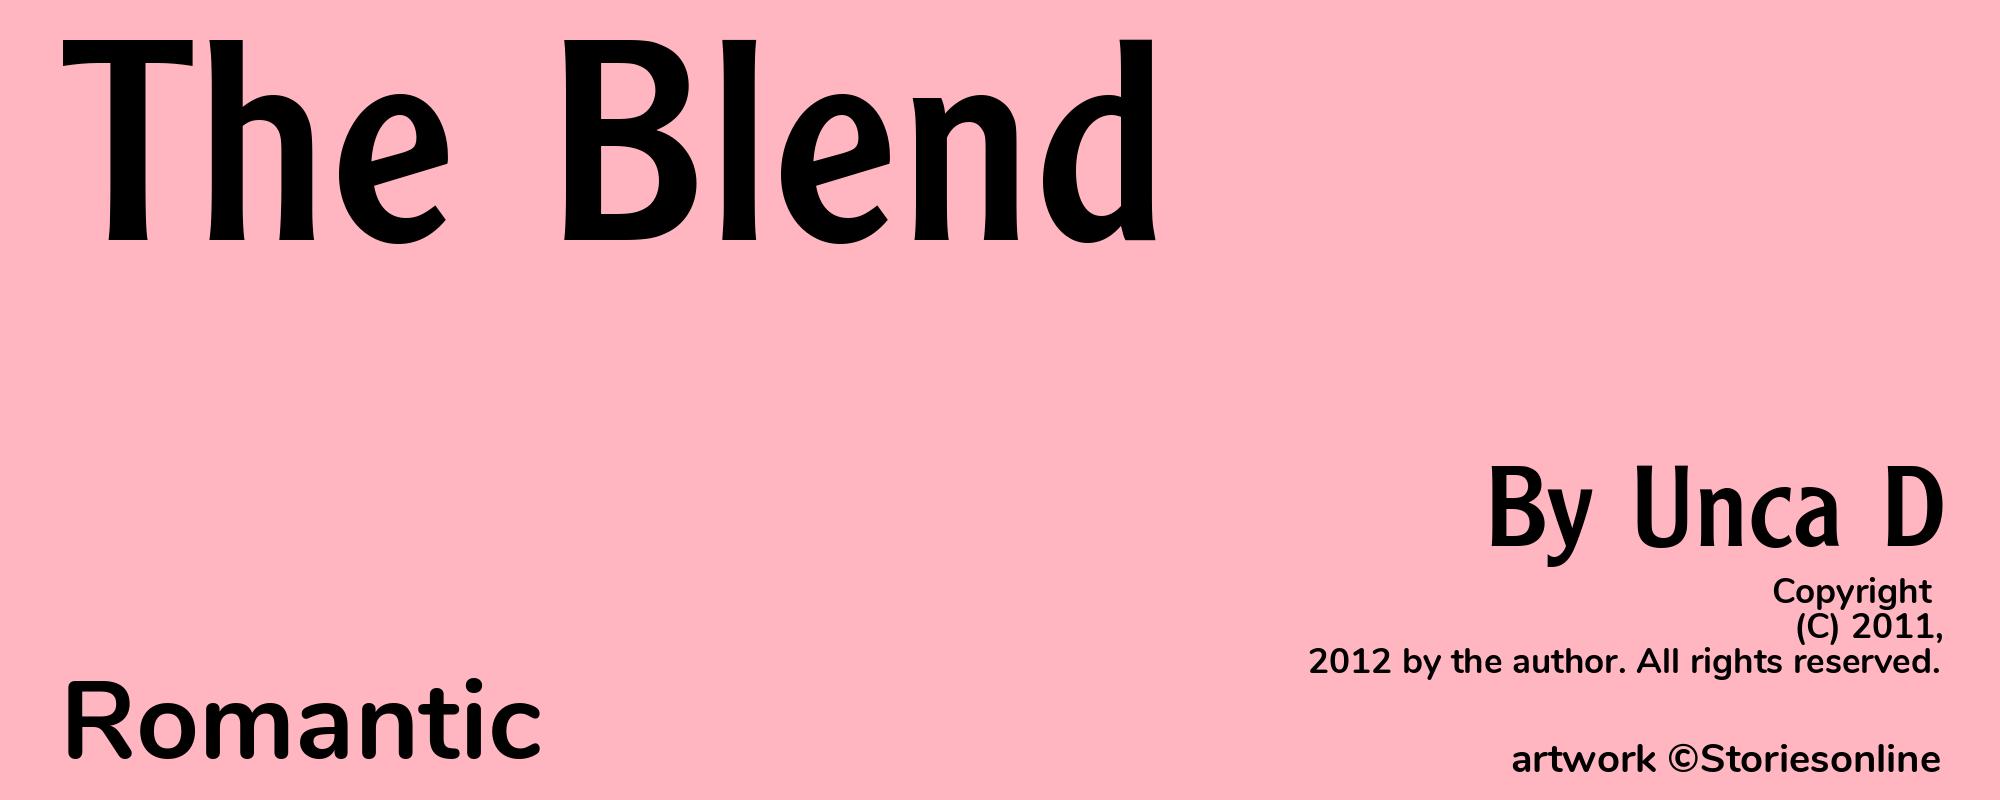 The Blend - Cover